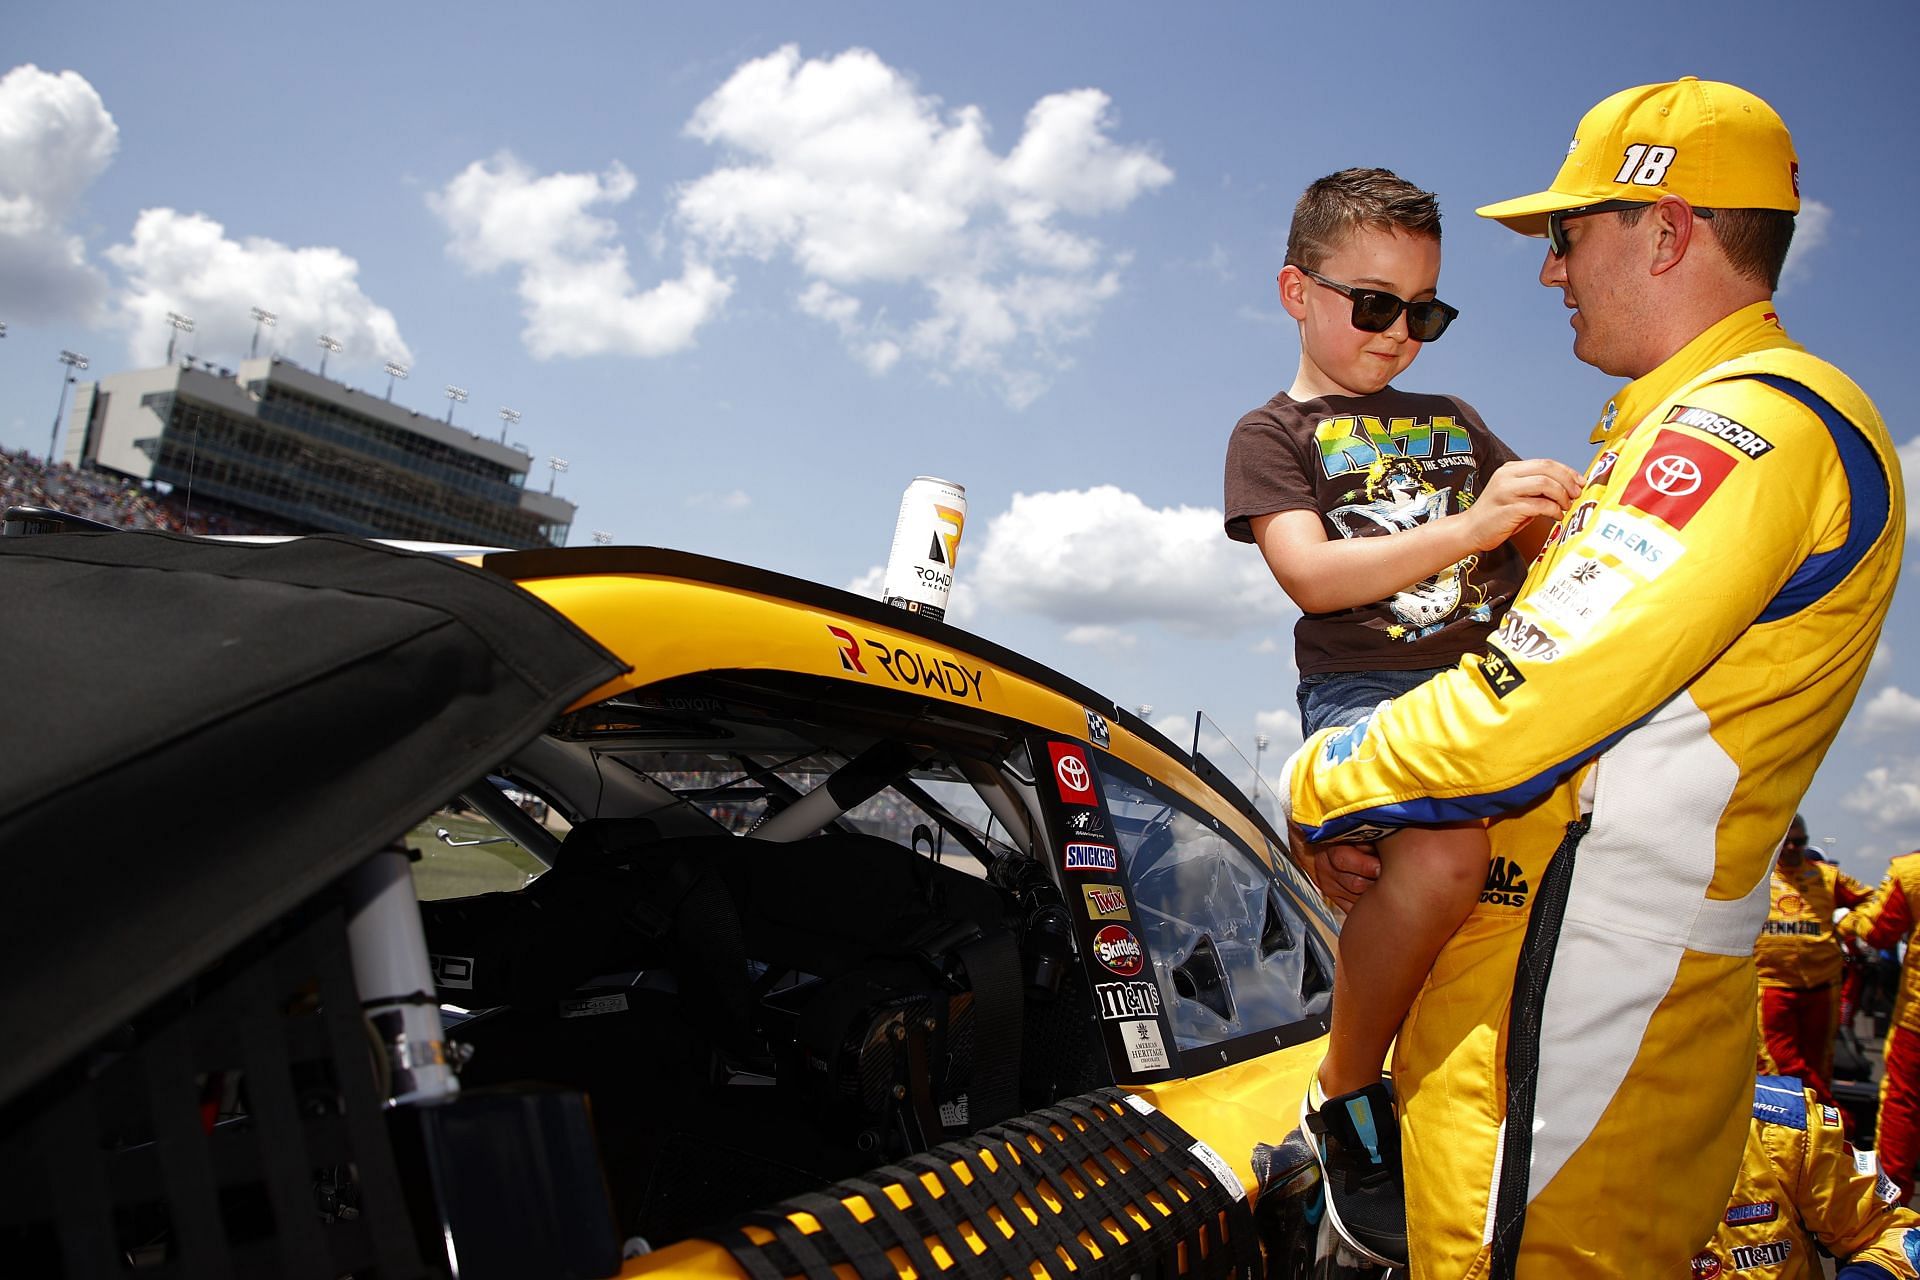 Kyle Busch spend time with his son Brexton on the grid prior to the NASCAR Cup Series Ally 400 at Nashville Superspeedway